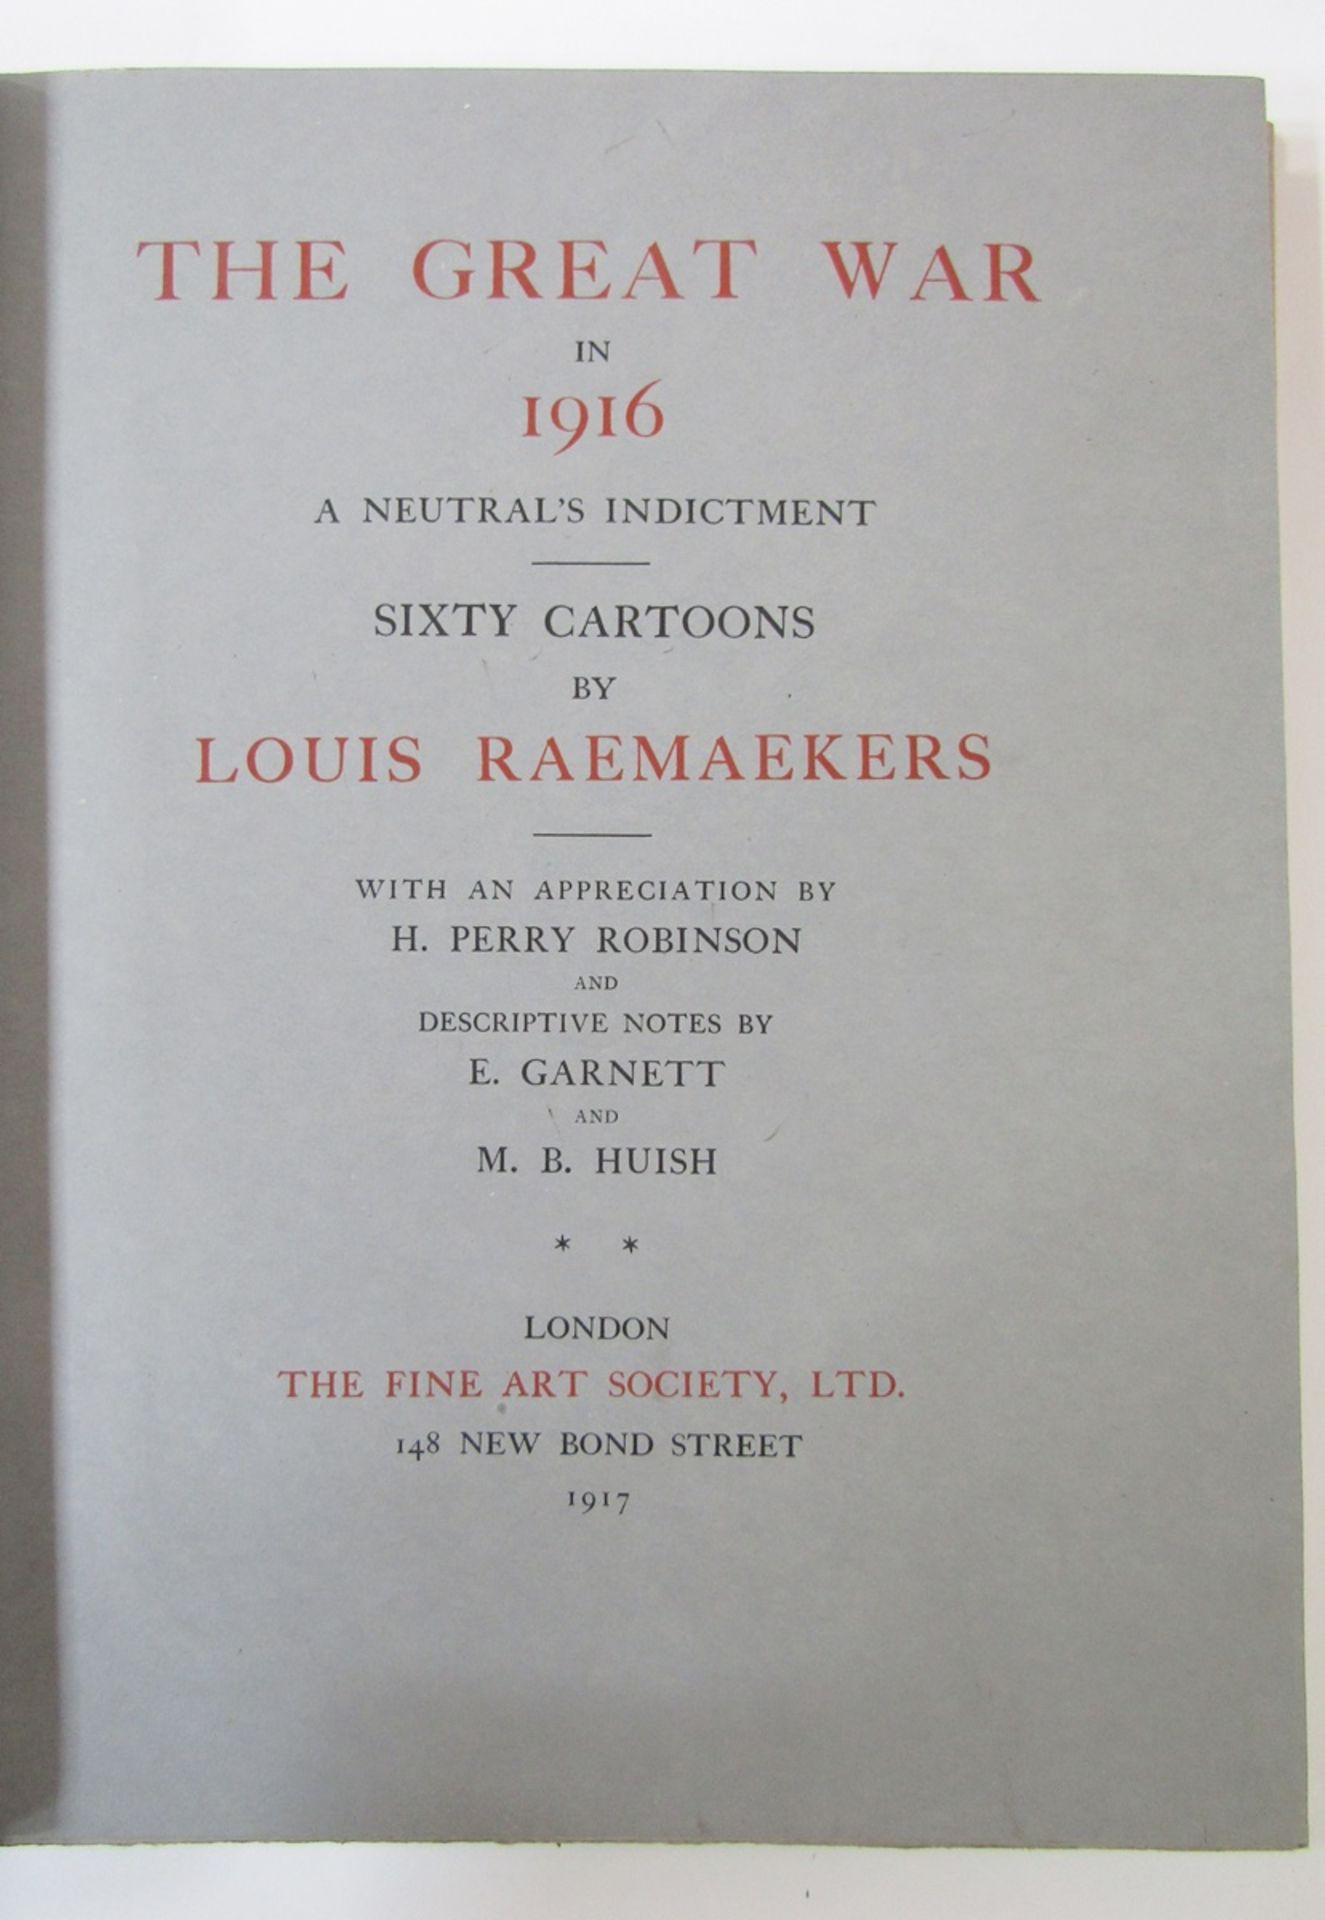 Raemaekers, Louis. (ills.) "The Great War in 1916 - A Neutral's Indictment" The Fine Art Society - Image 7 of 26